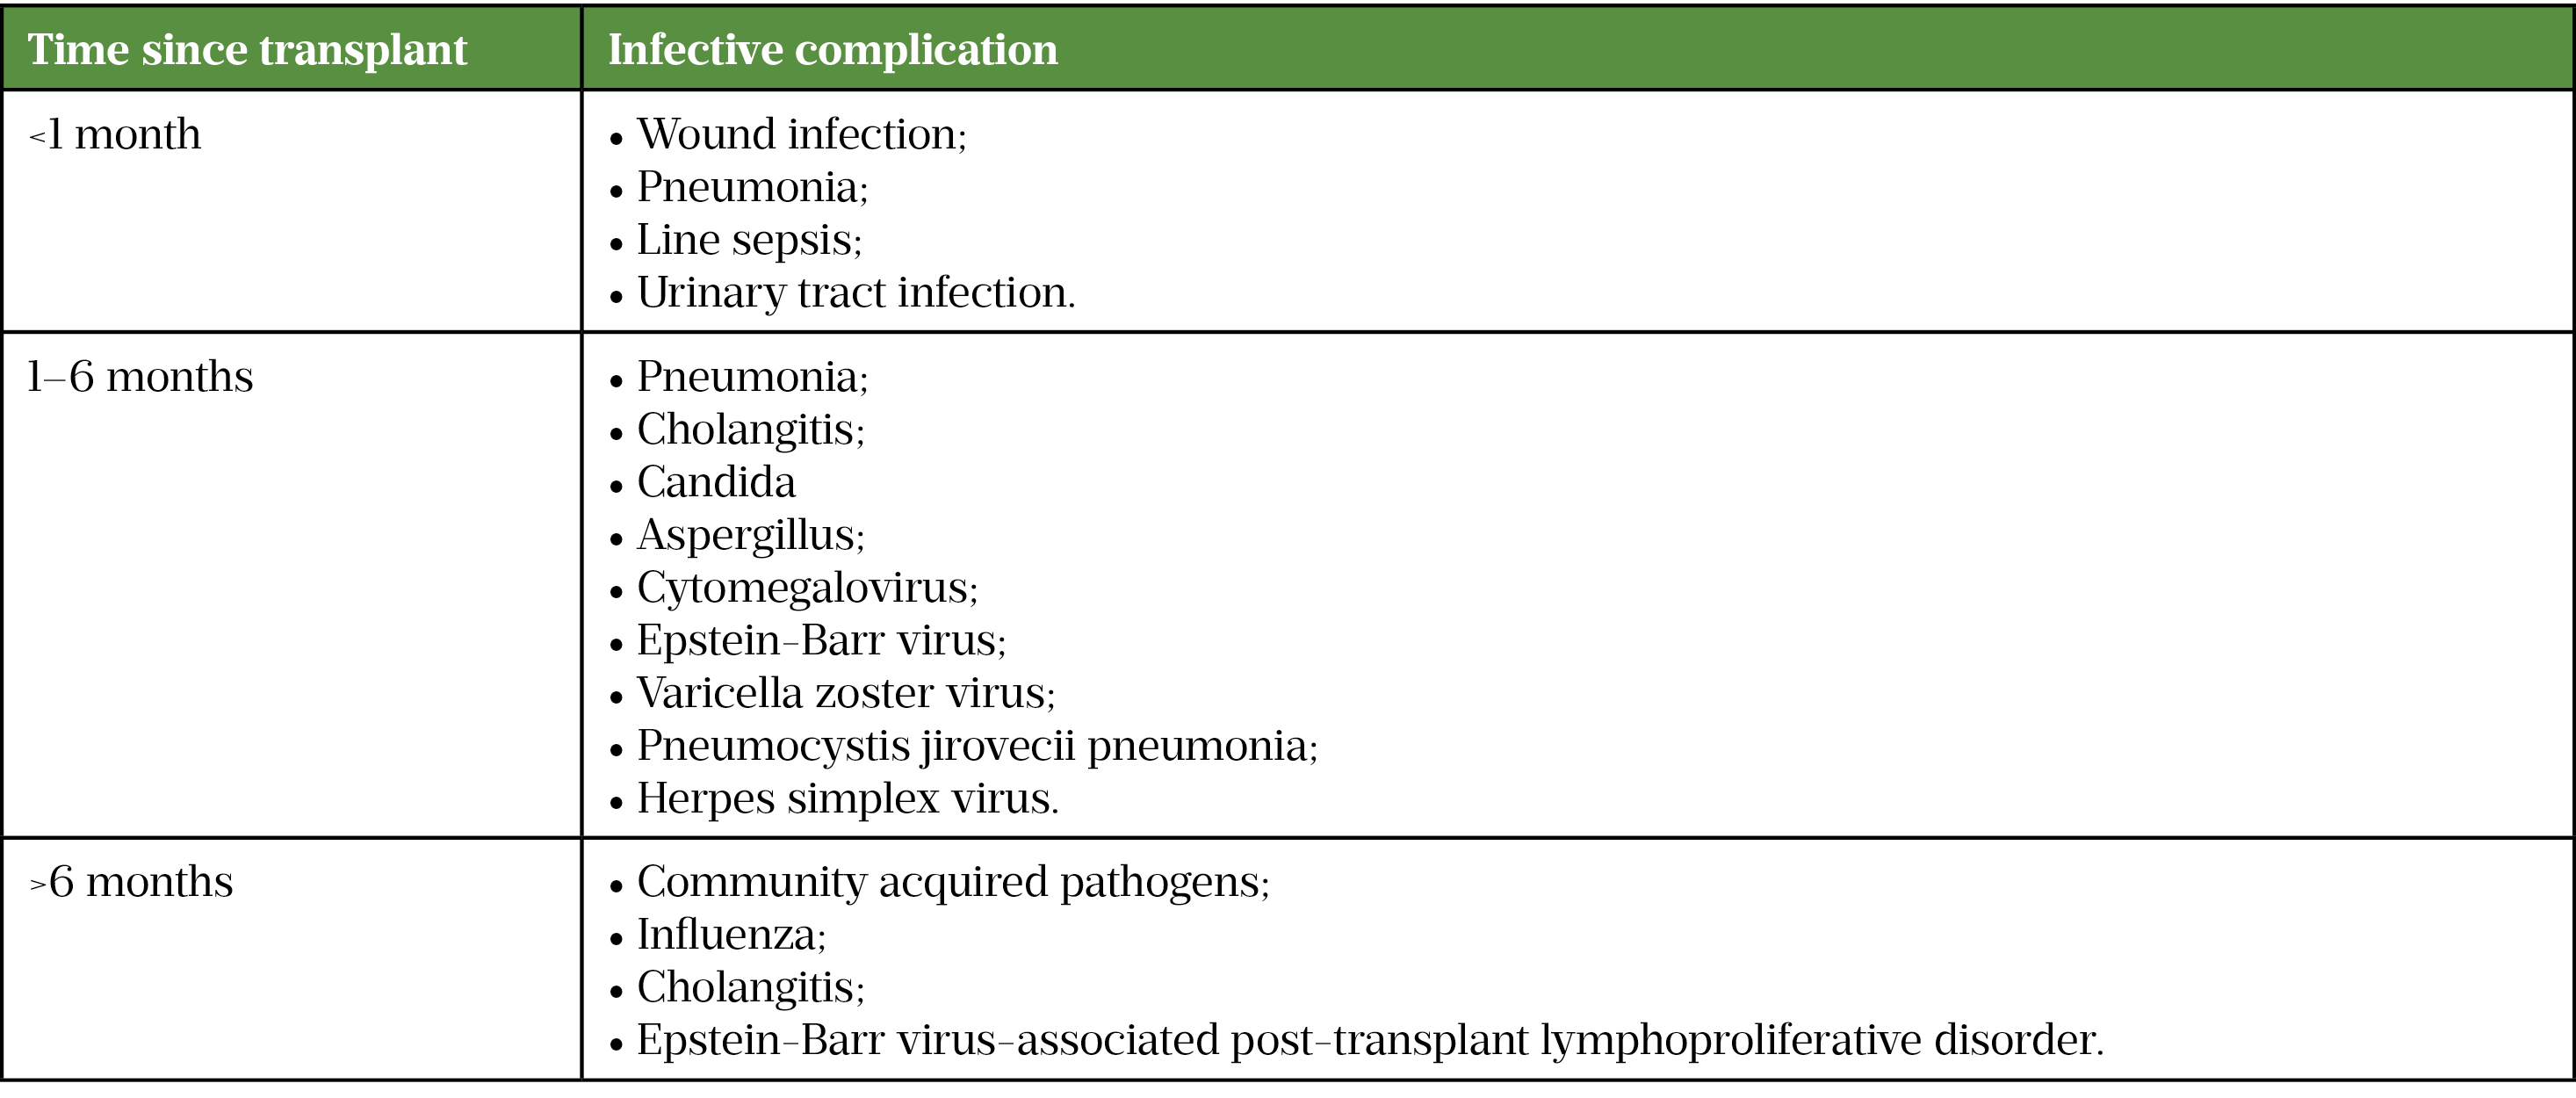 Table 4: Common infections encountered according to the time since transplant